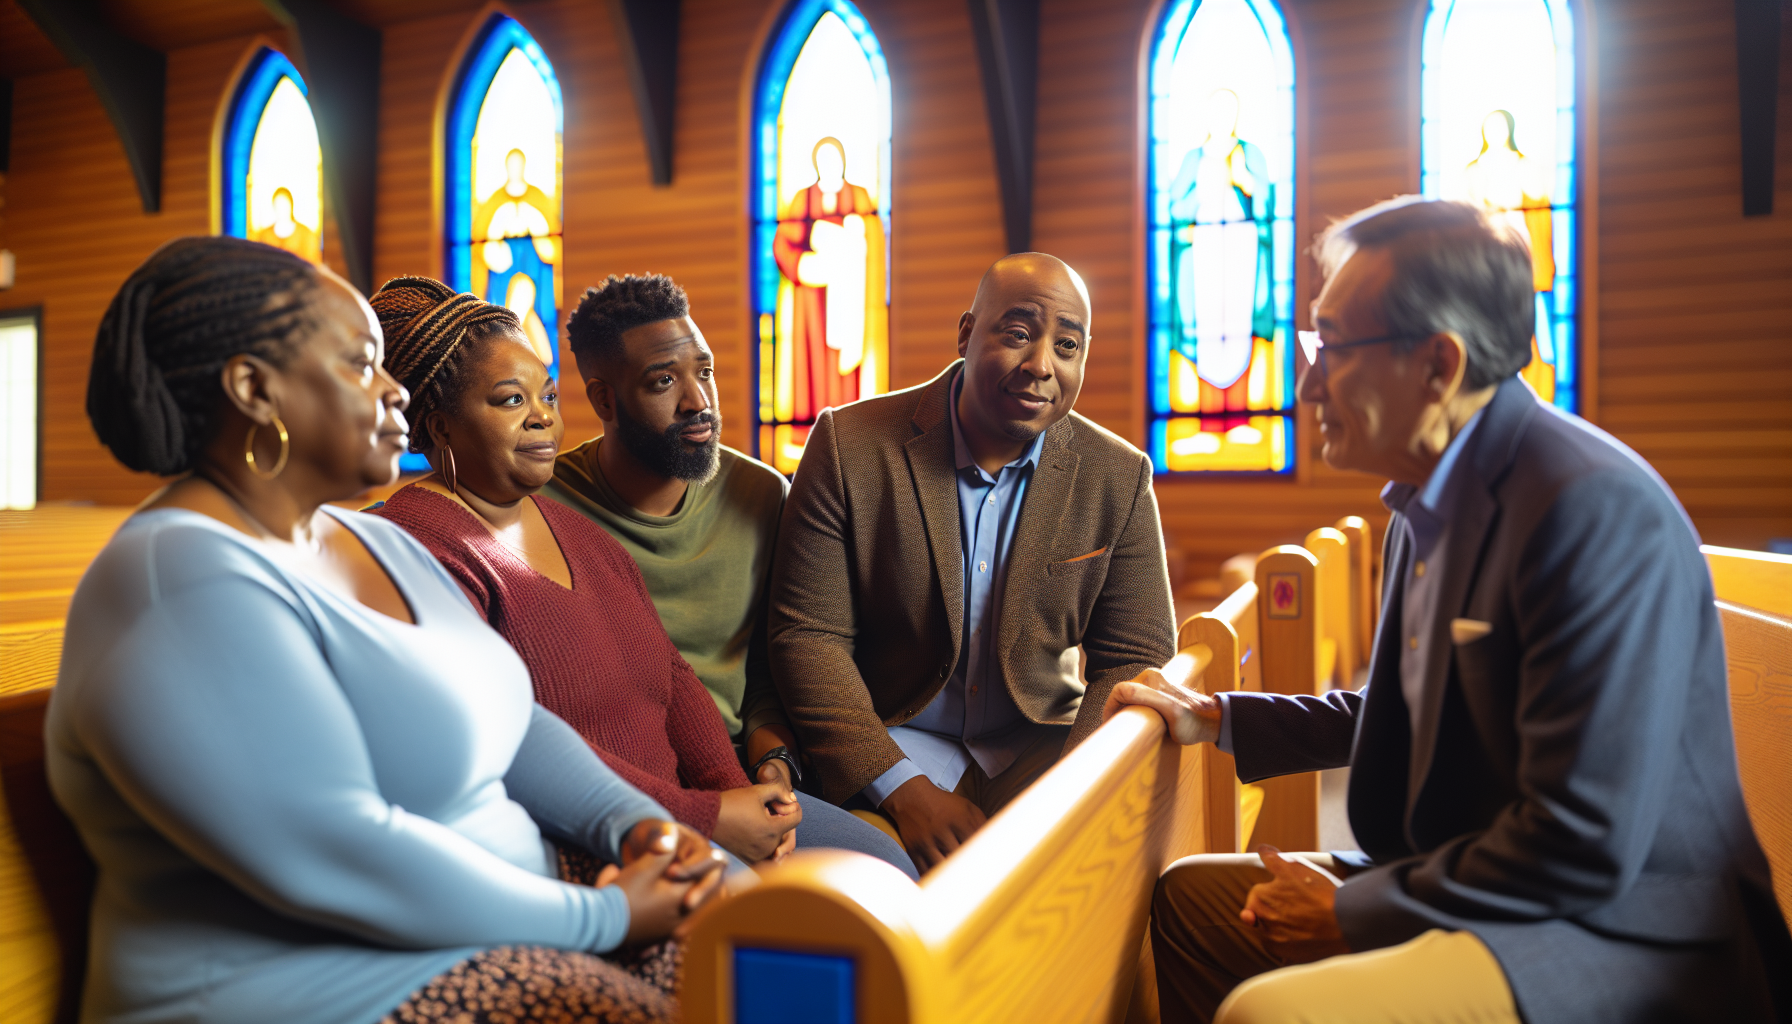 Church leaders providing support and guidance to individuals